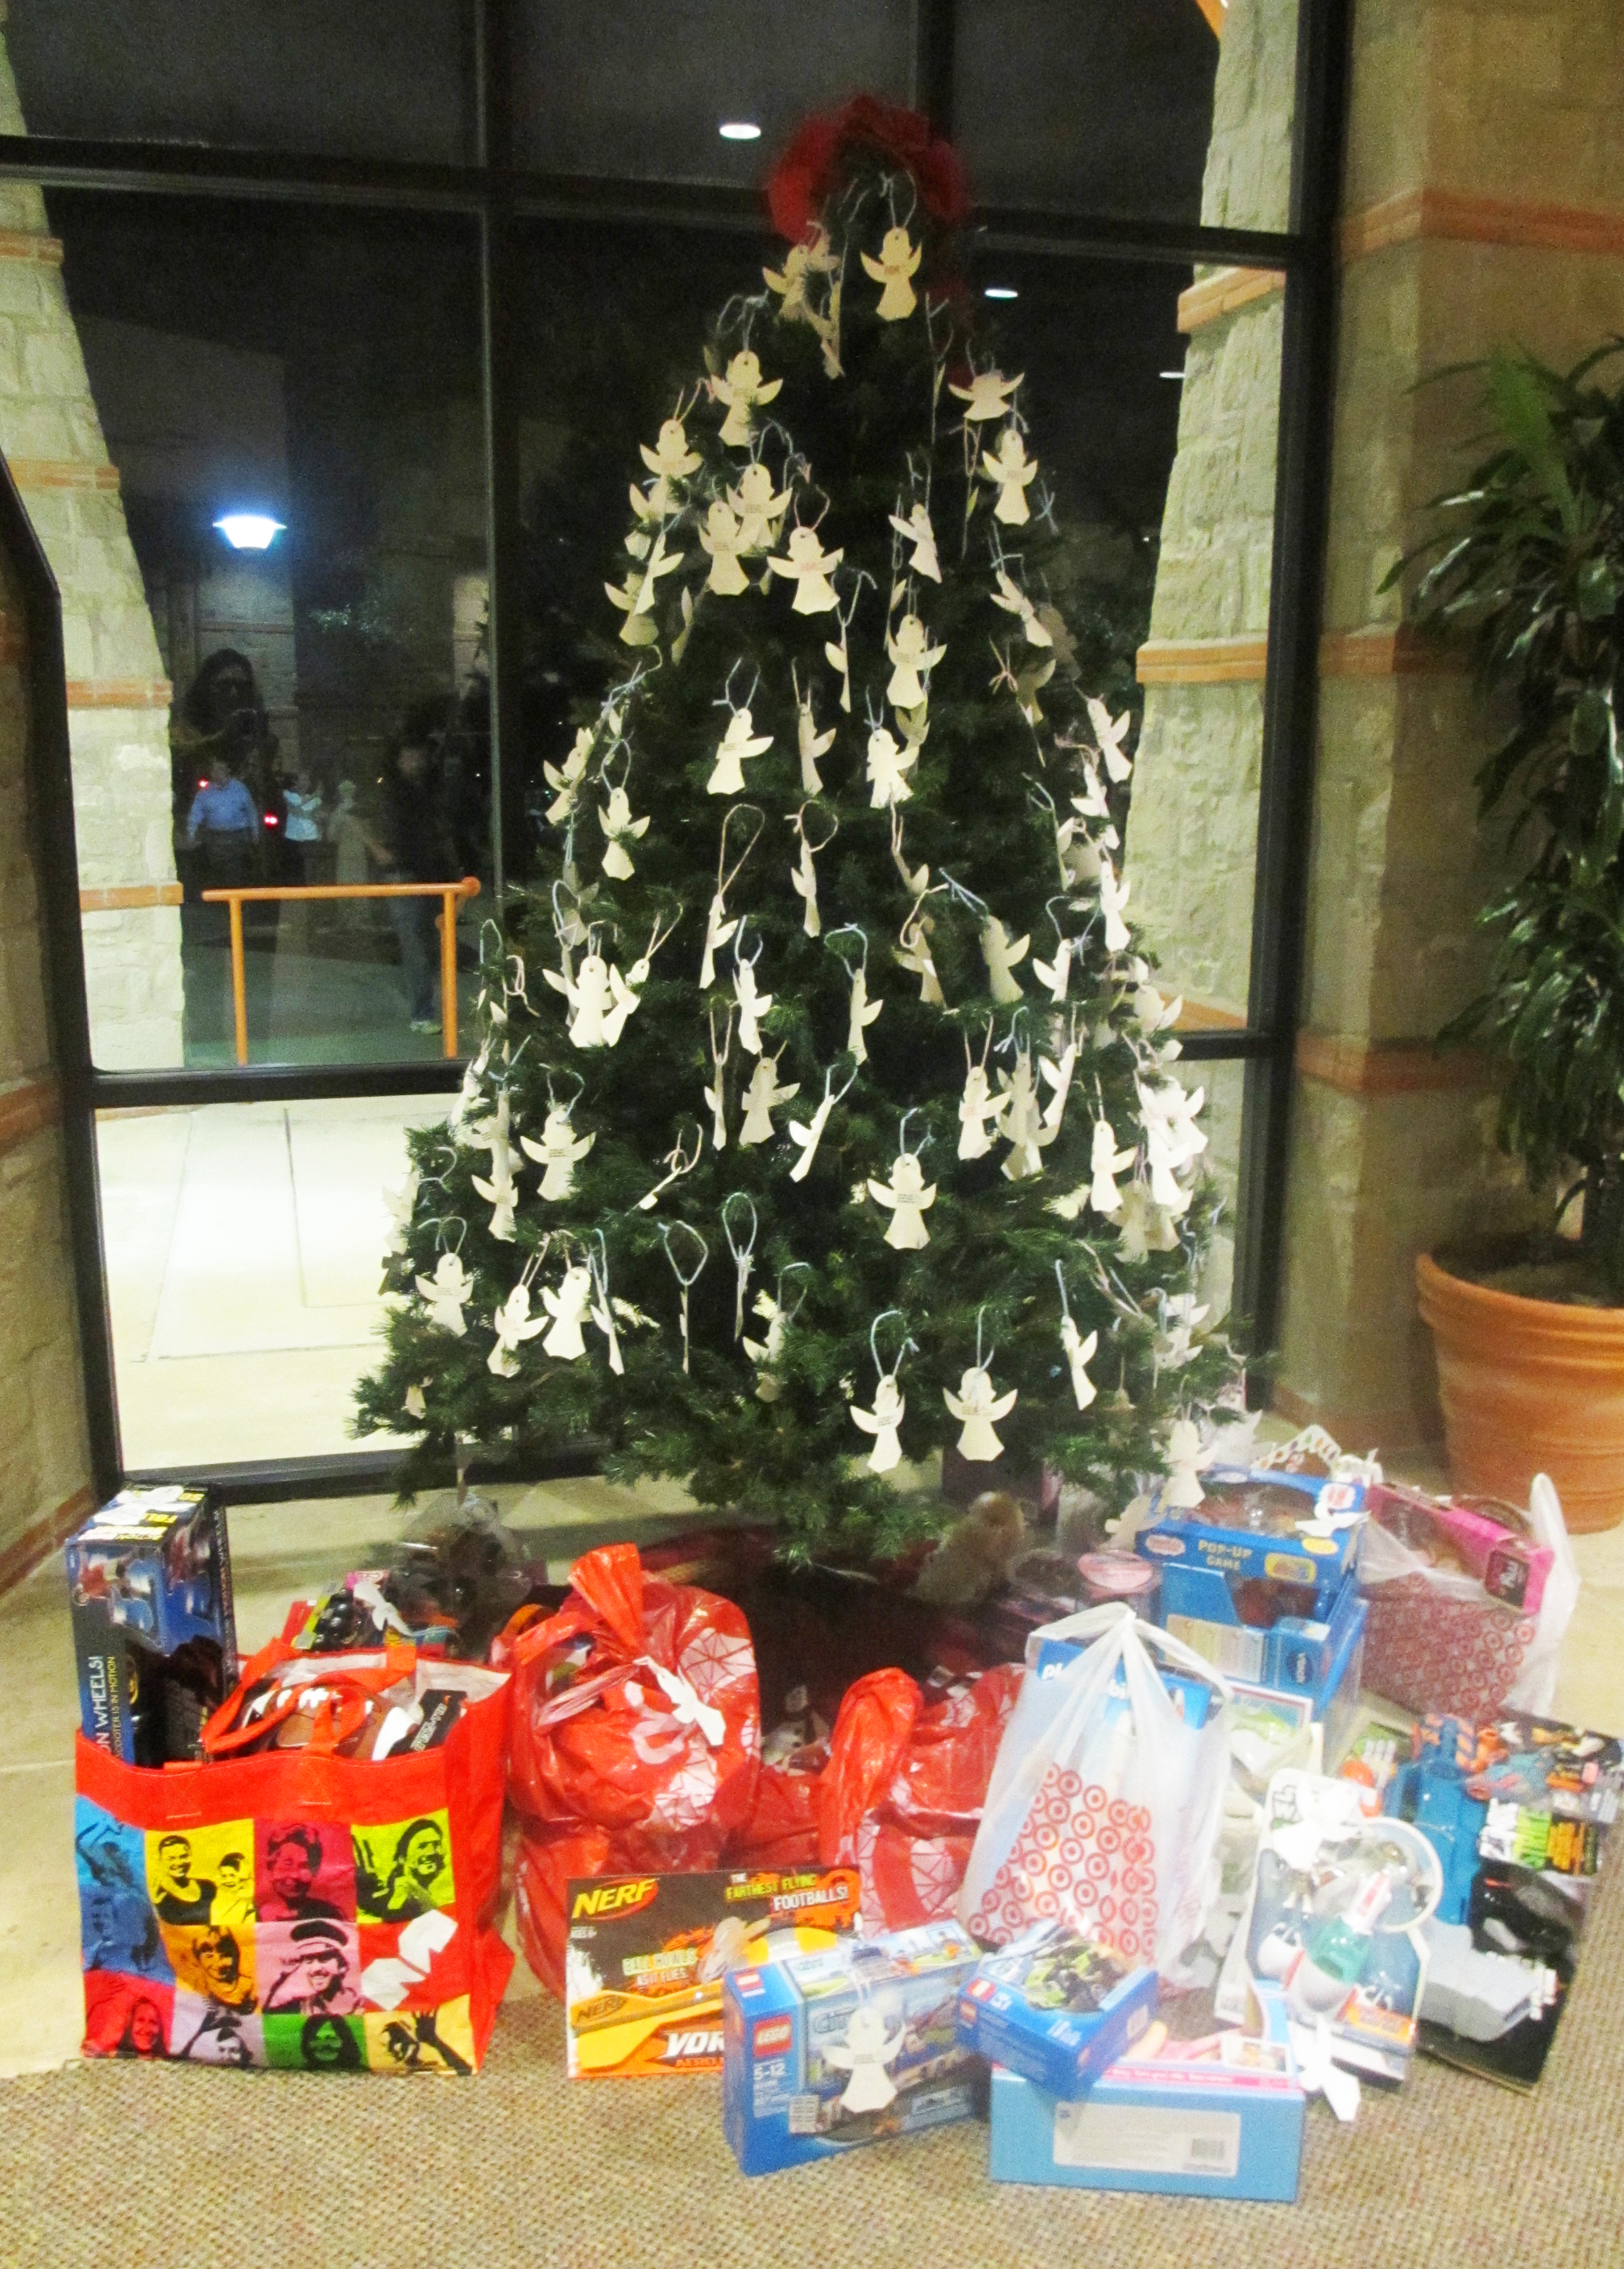 Our St Vincent De Paul Society S Angel Tree Program Benefiting Children From Needy Families In Community Began On November 24